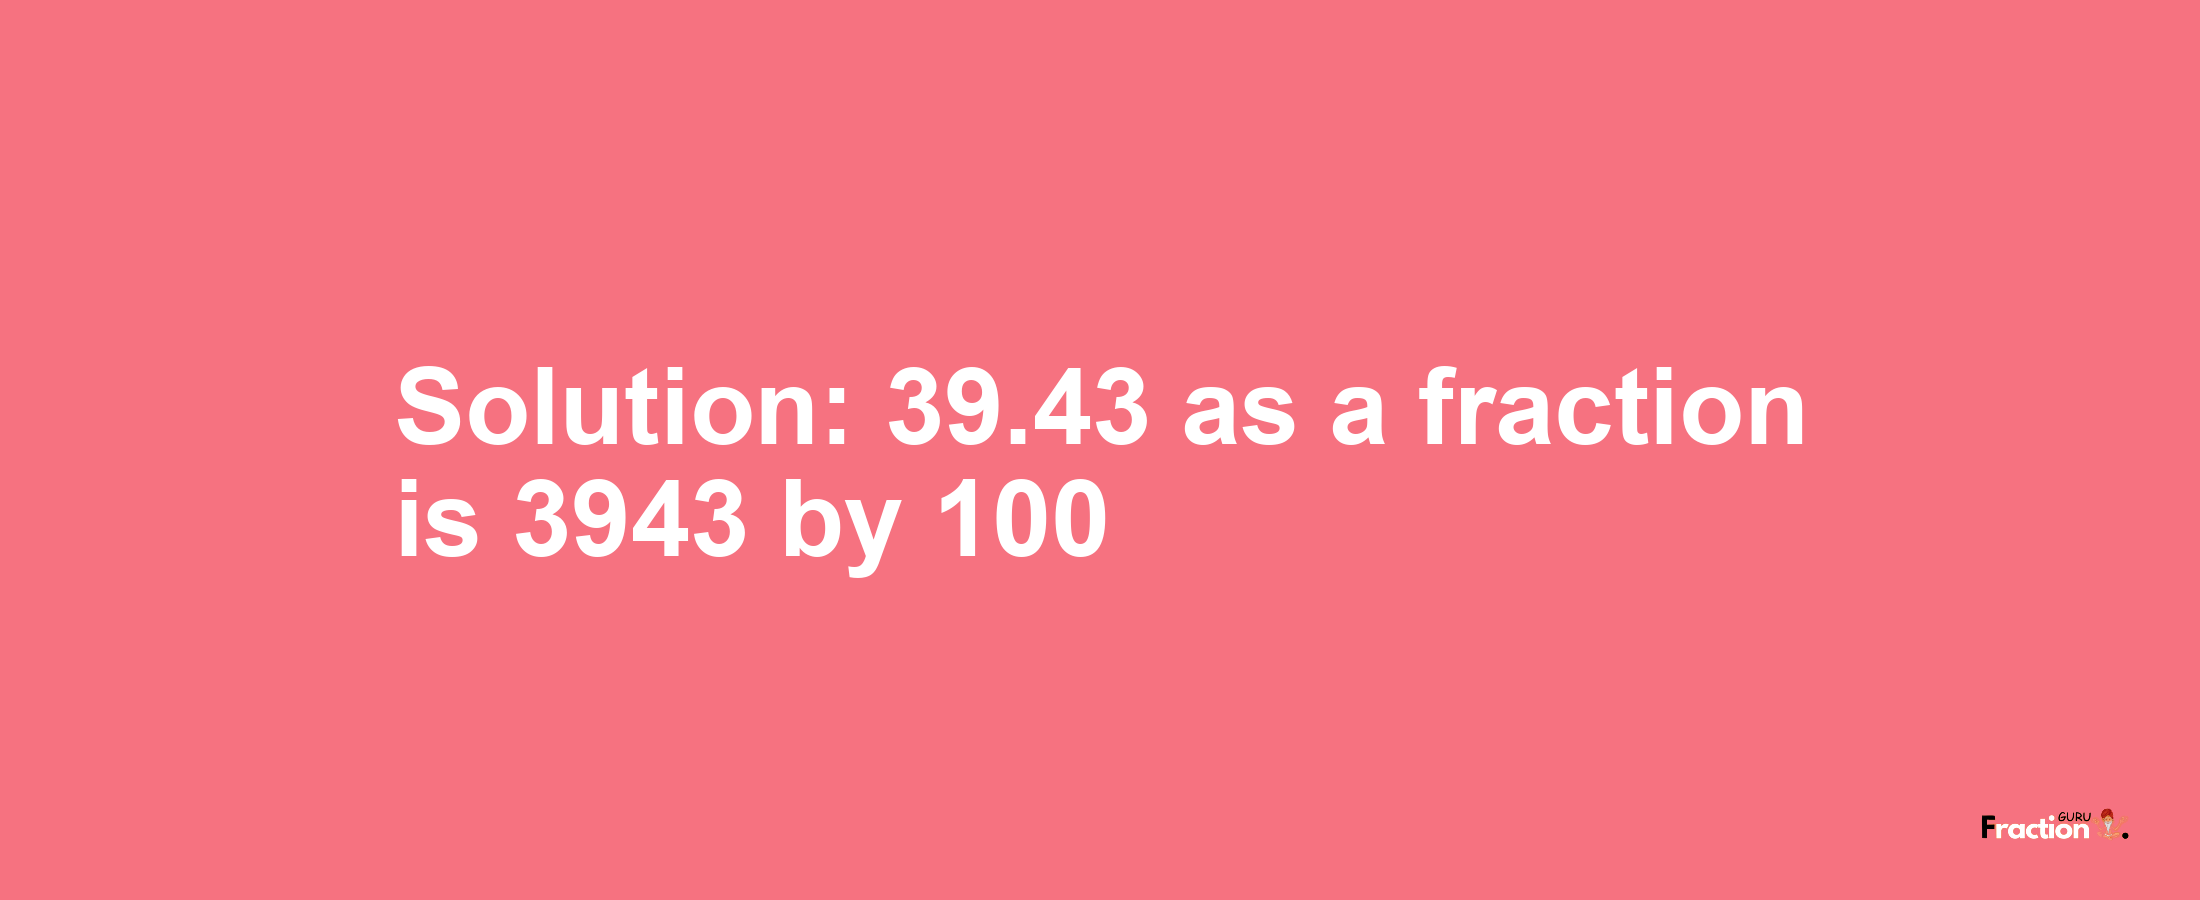 Solution:39.43 as a fraction is 3943/100